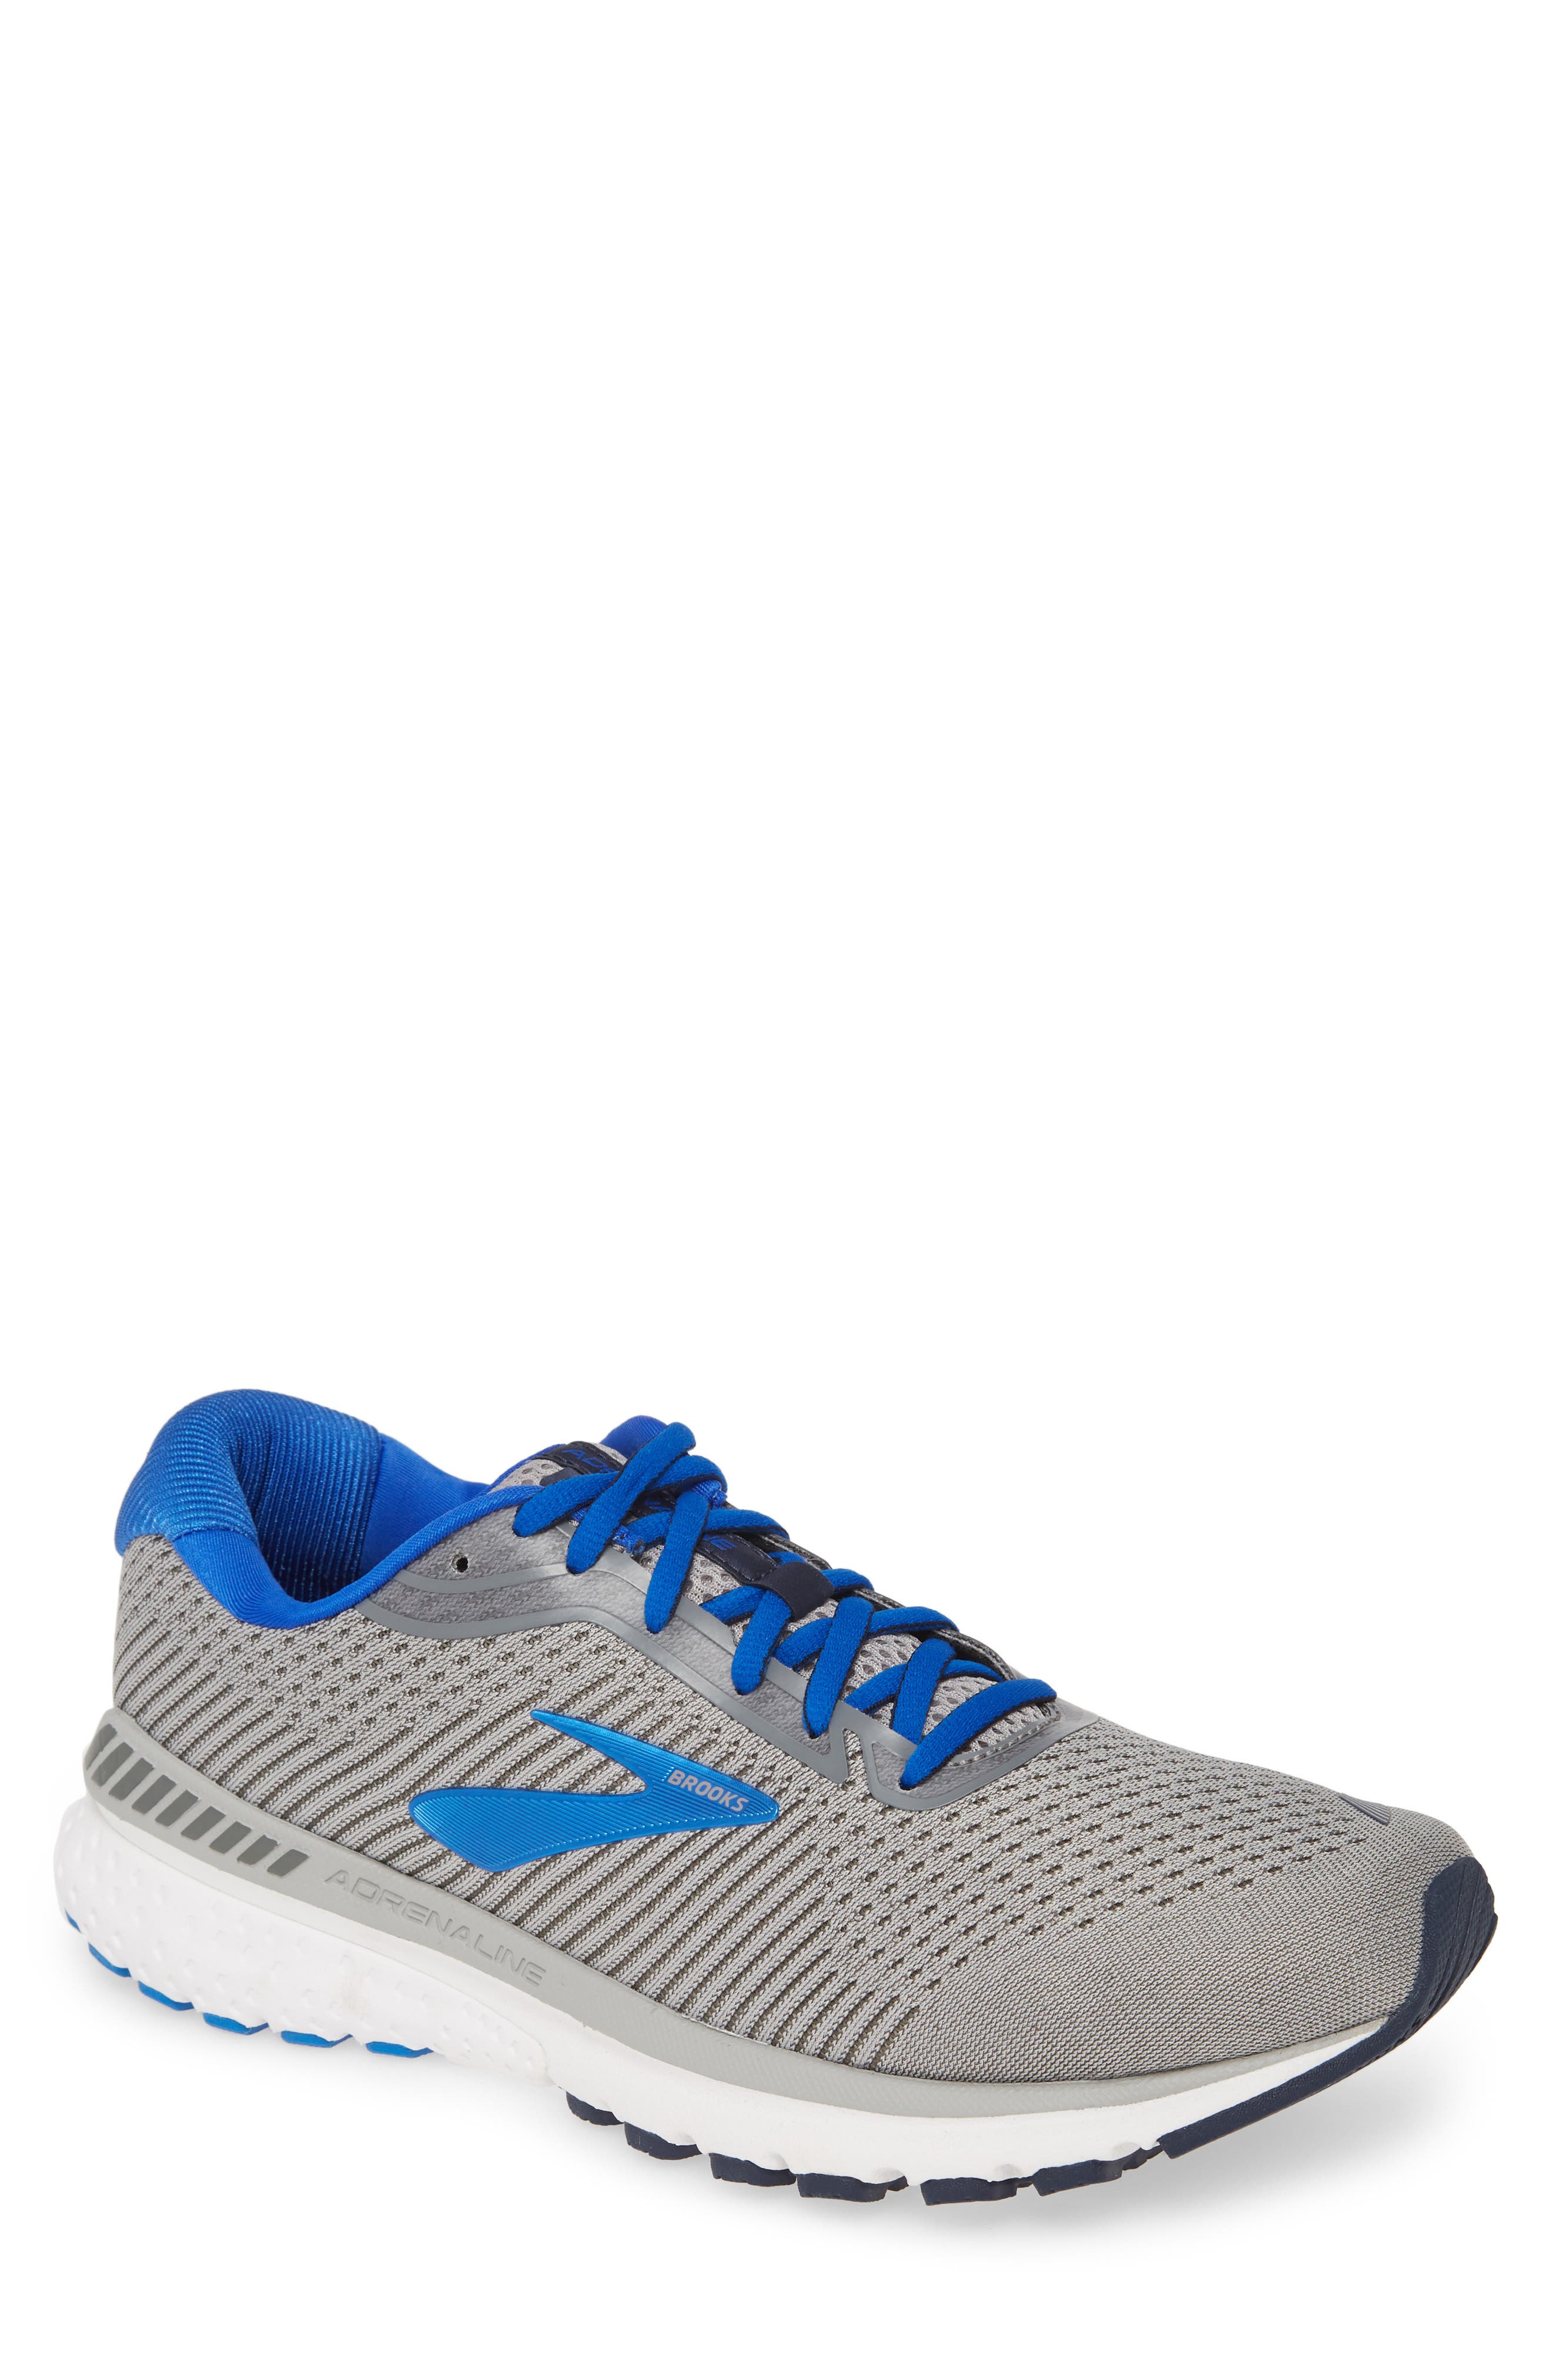 brooks running shoes clearance mens